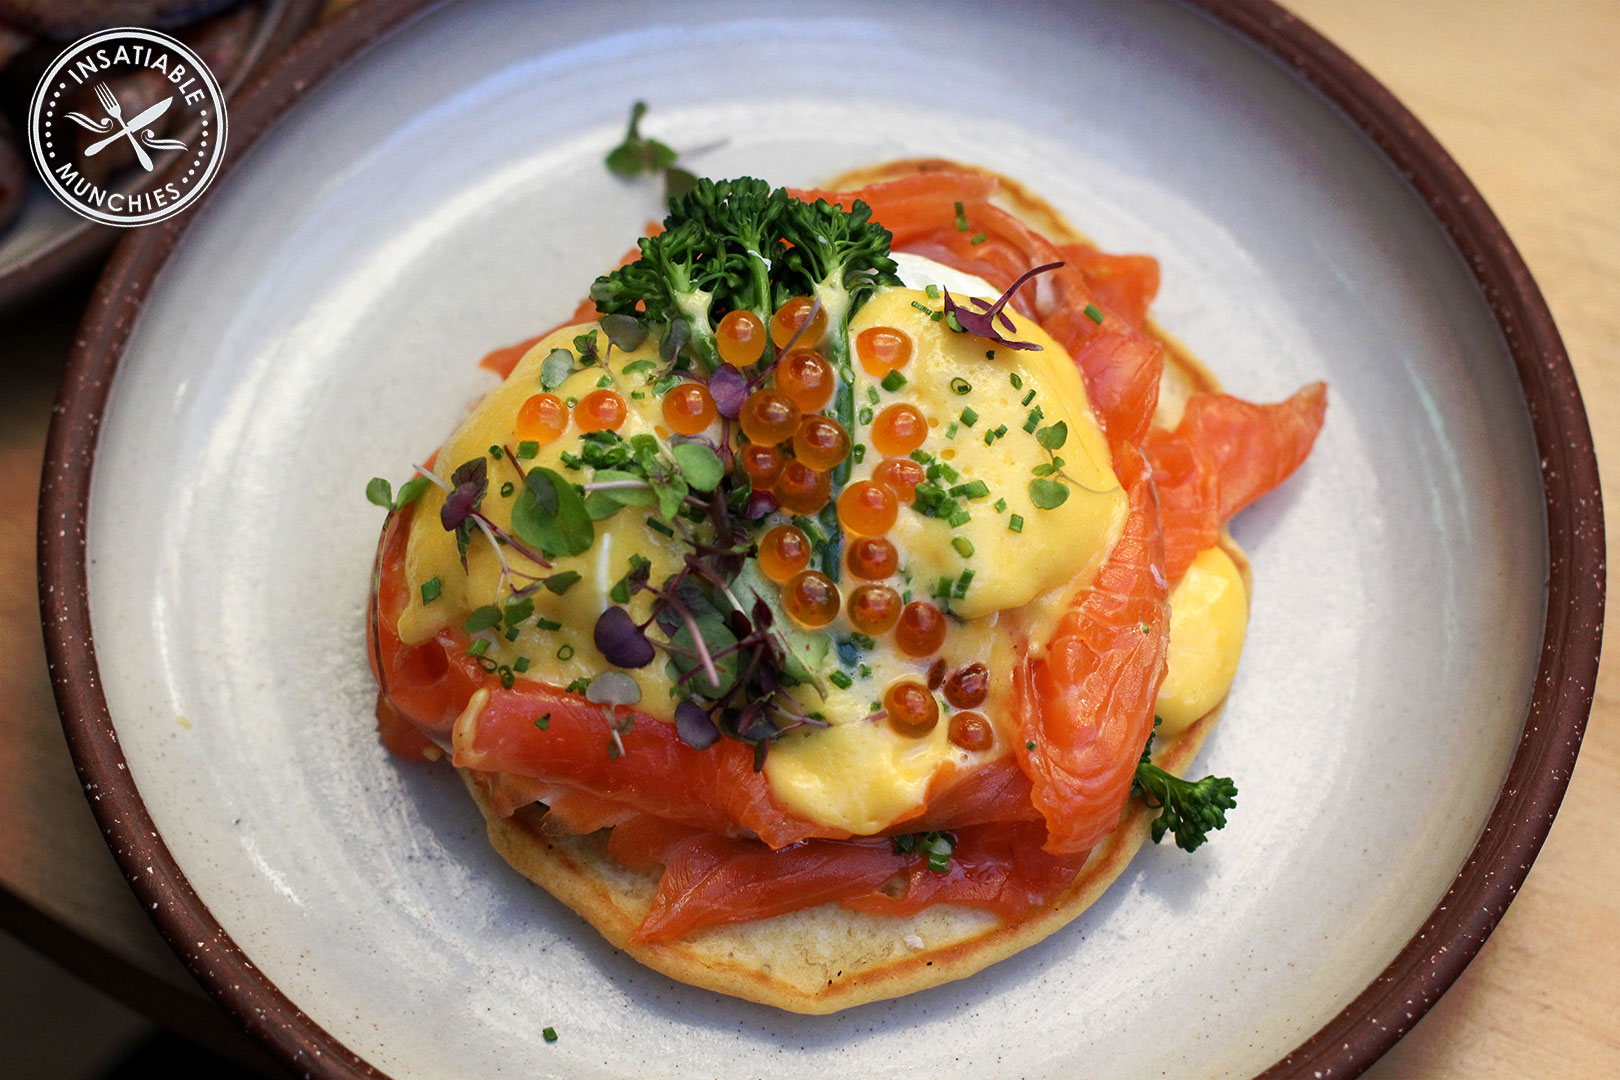 Eggs Blini: Buckwheat blini topped with poached egg, broccolini, cured salmon and sauce Mikado, a mandarin hollandaise that is a richer orange that the traditional hollandaise